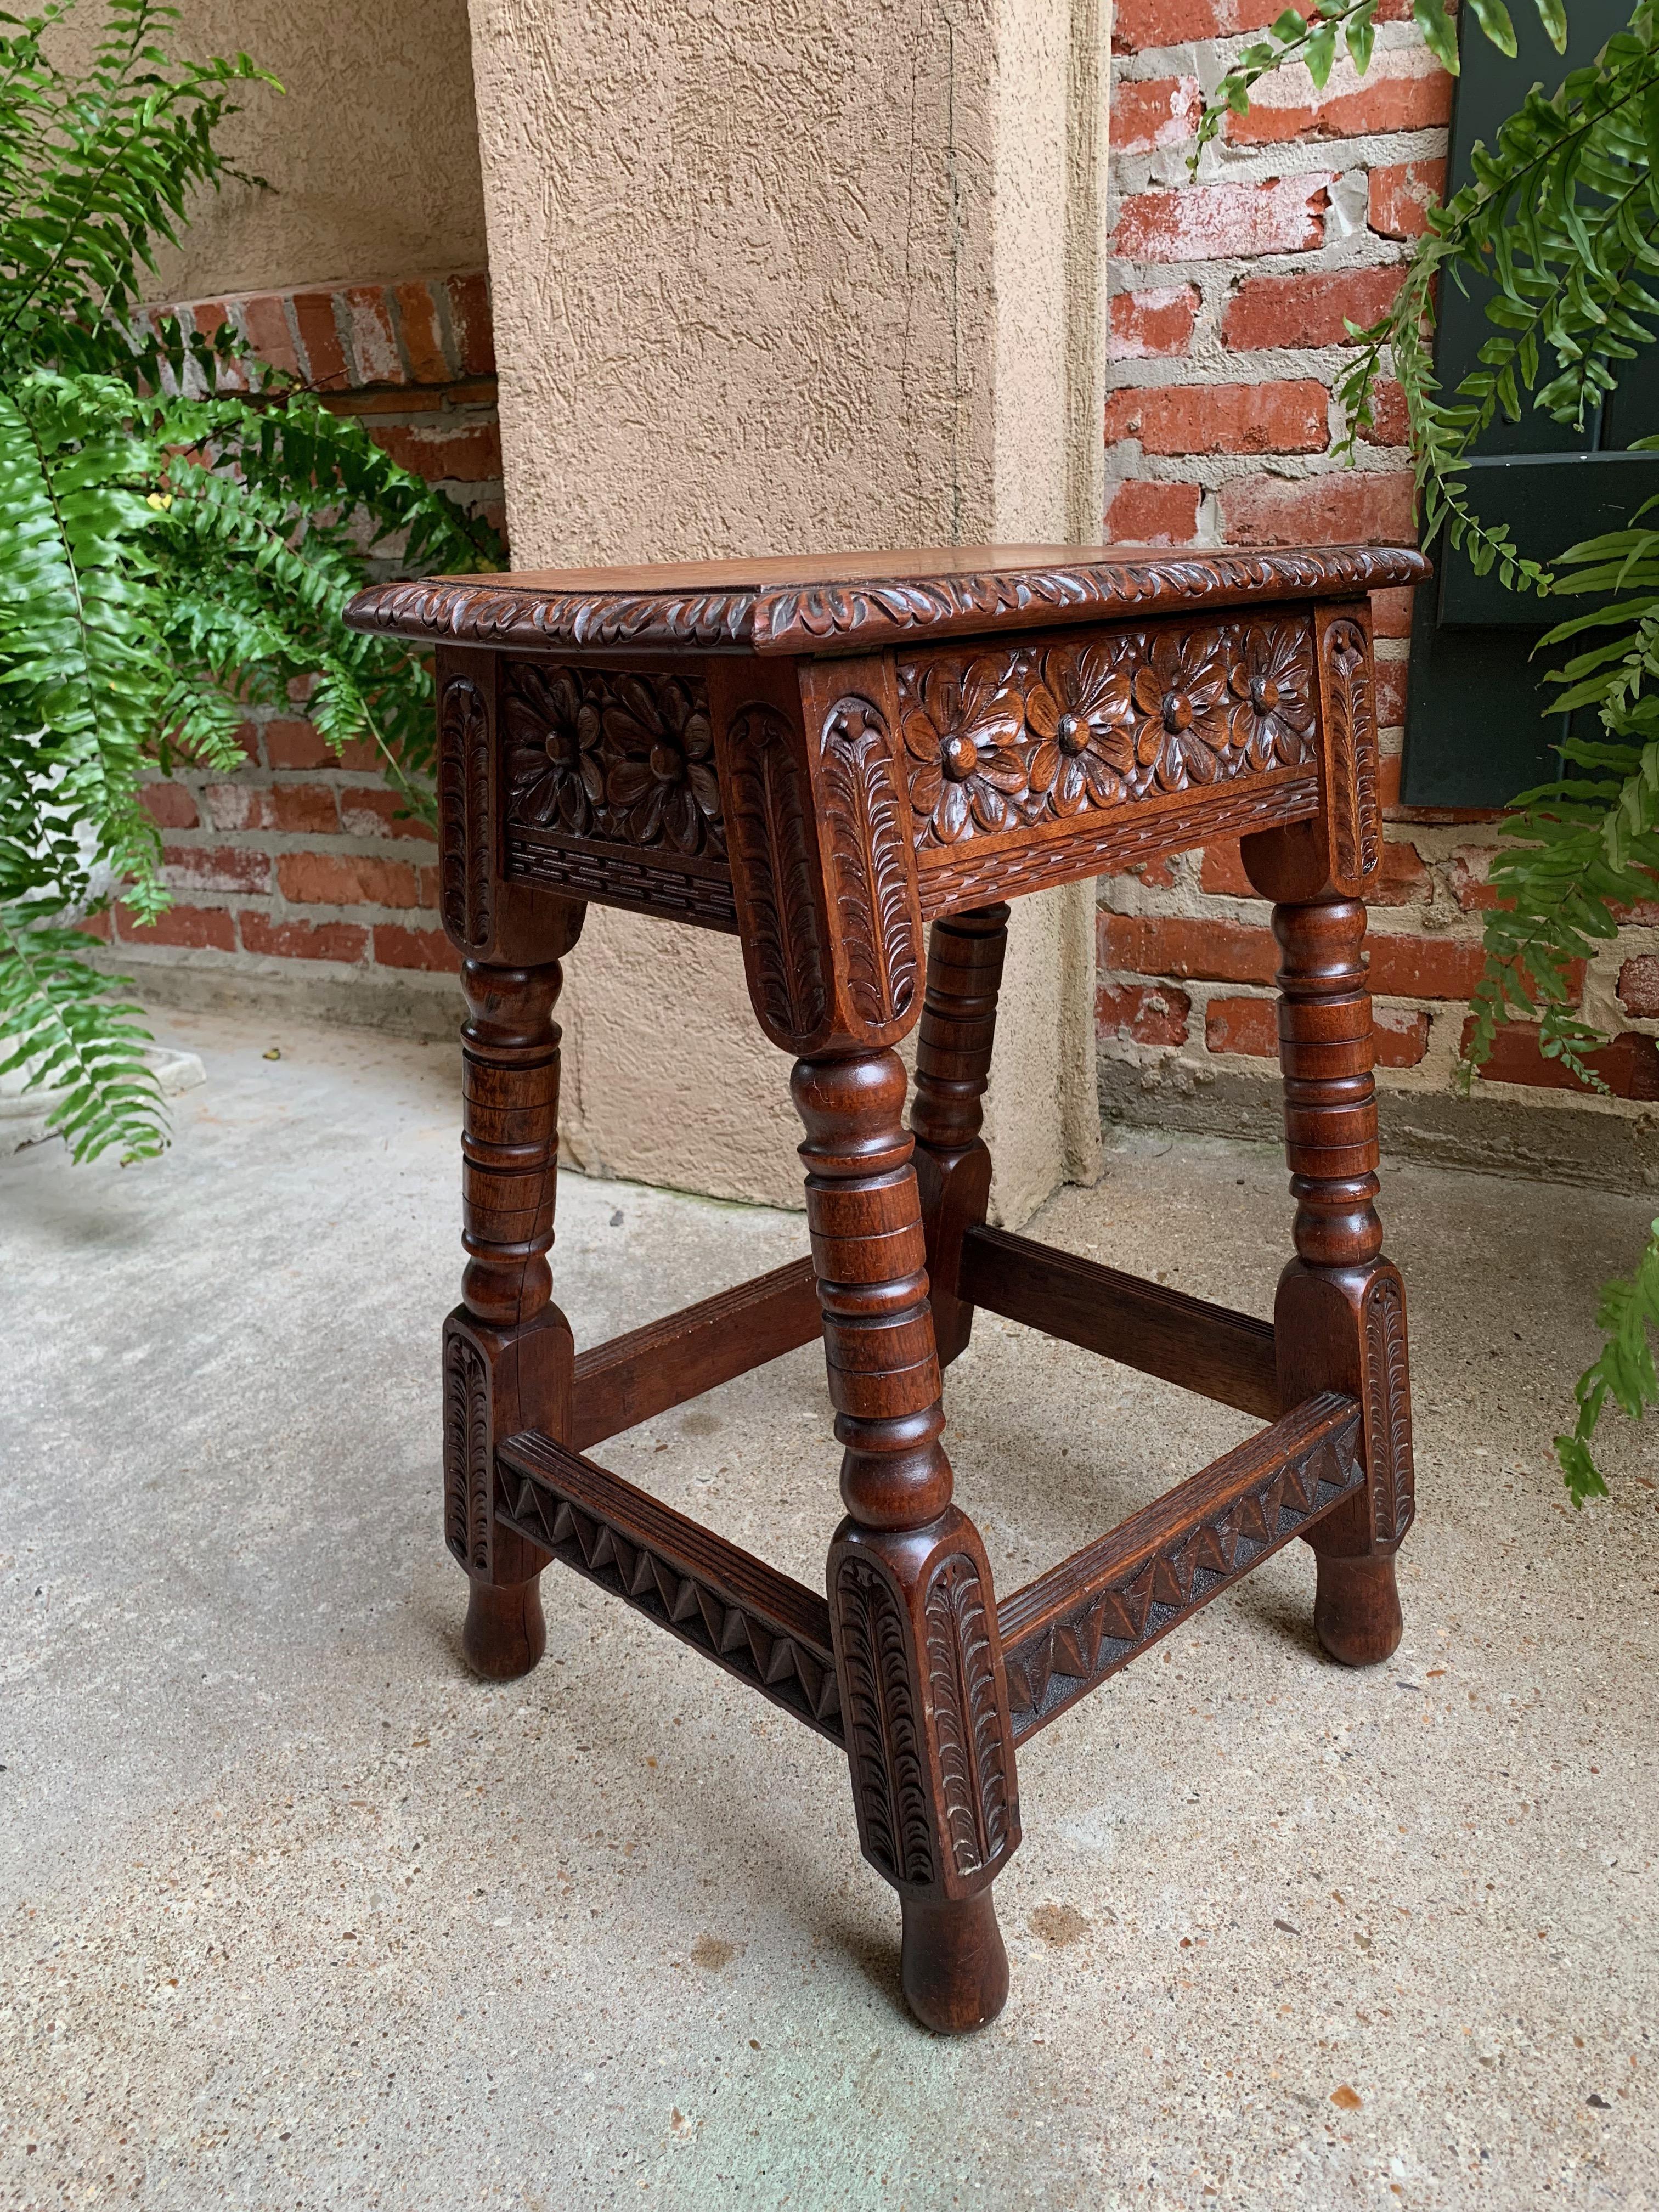 Antique English carved oak joint stool bench table lift top splayed leg c1900

~Direct from England~
~Lovely antique English oak bench or stool.~
~Carved, beveled edge top above the amazing, carved floral apron, carved to all sides, with carved